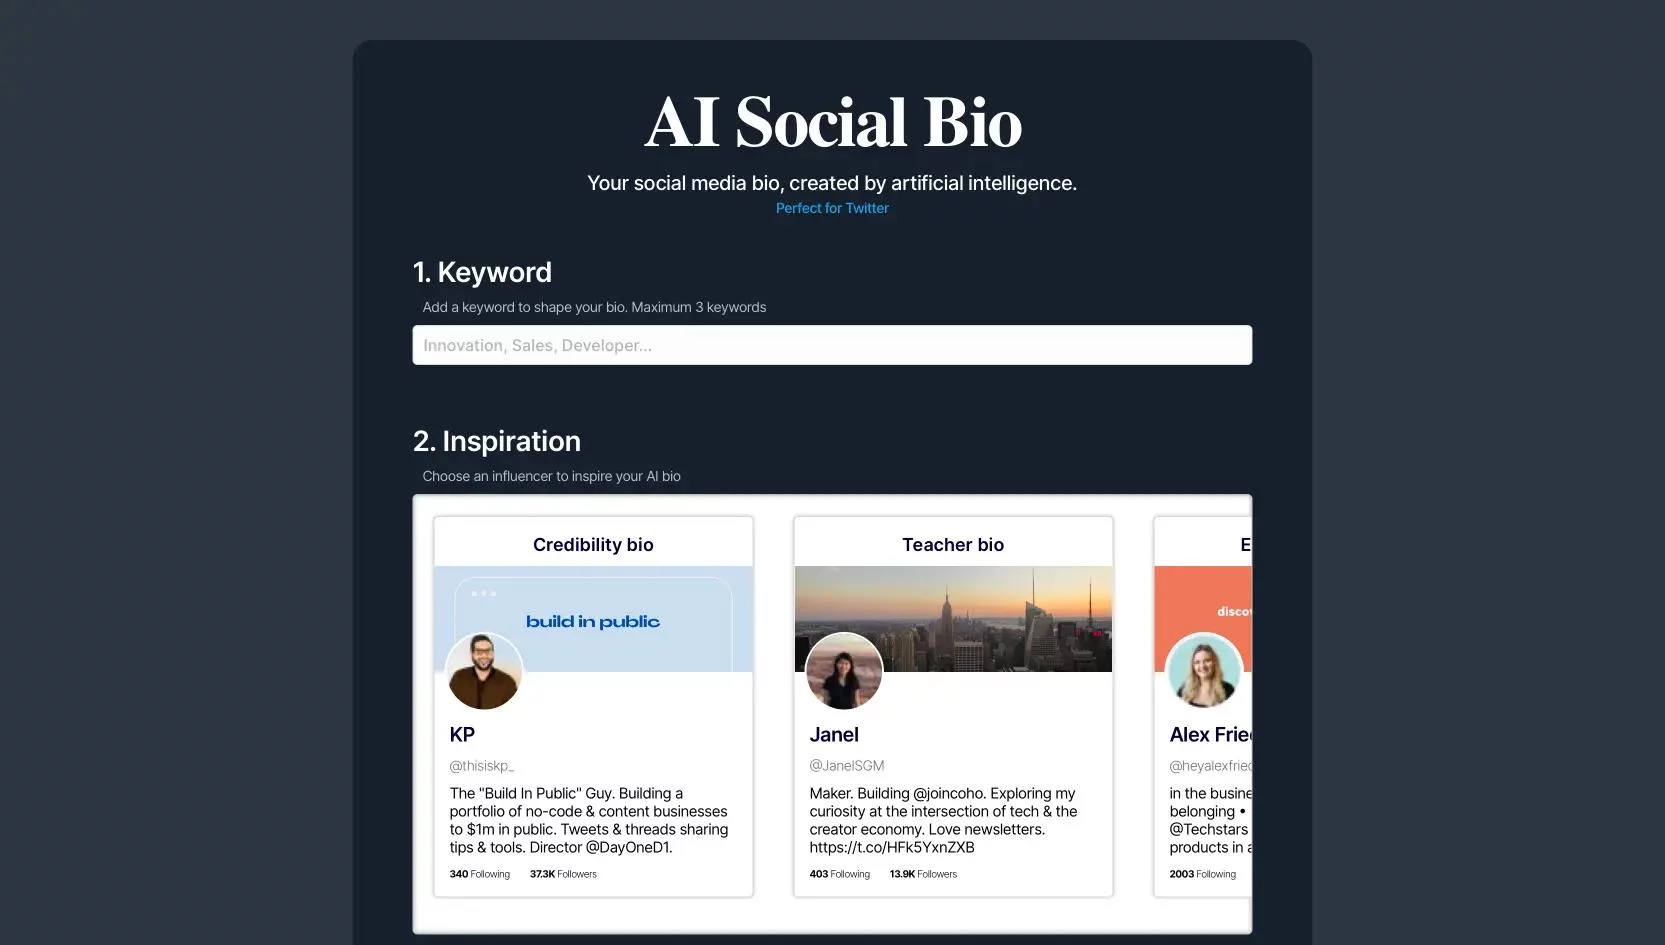  Automatically generate your social media bio